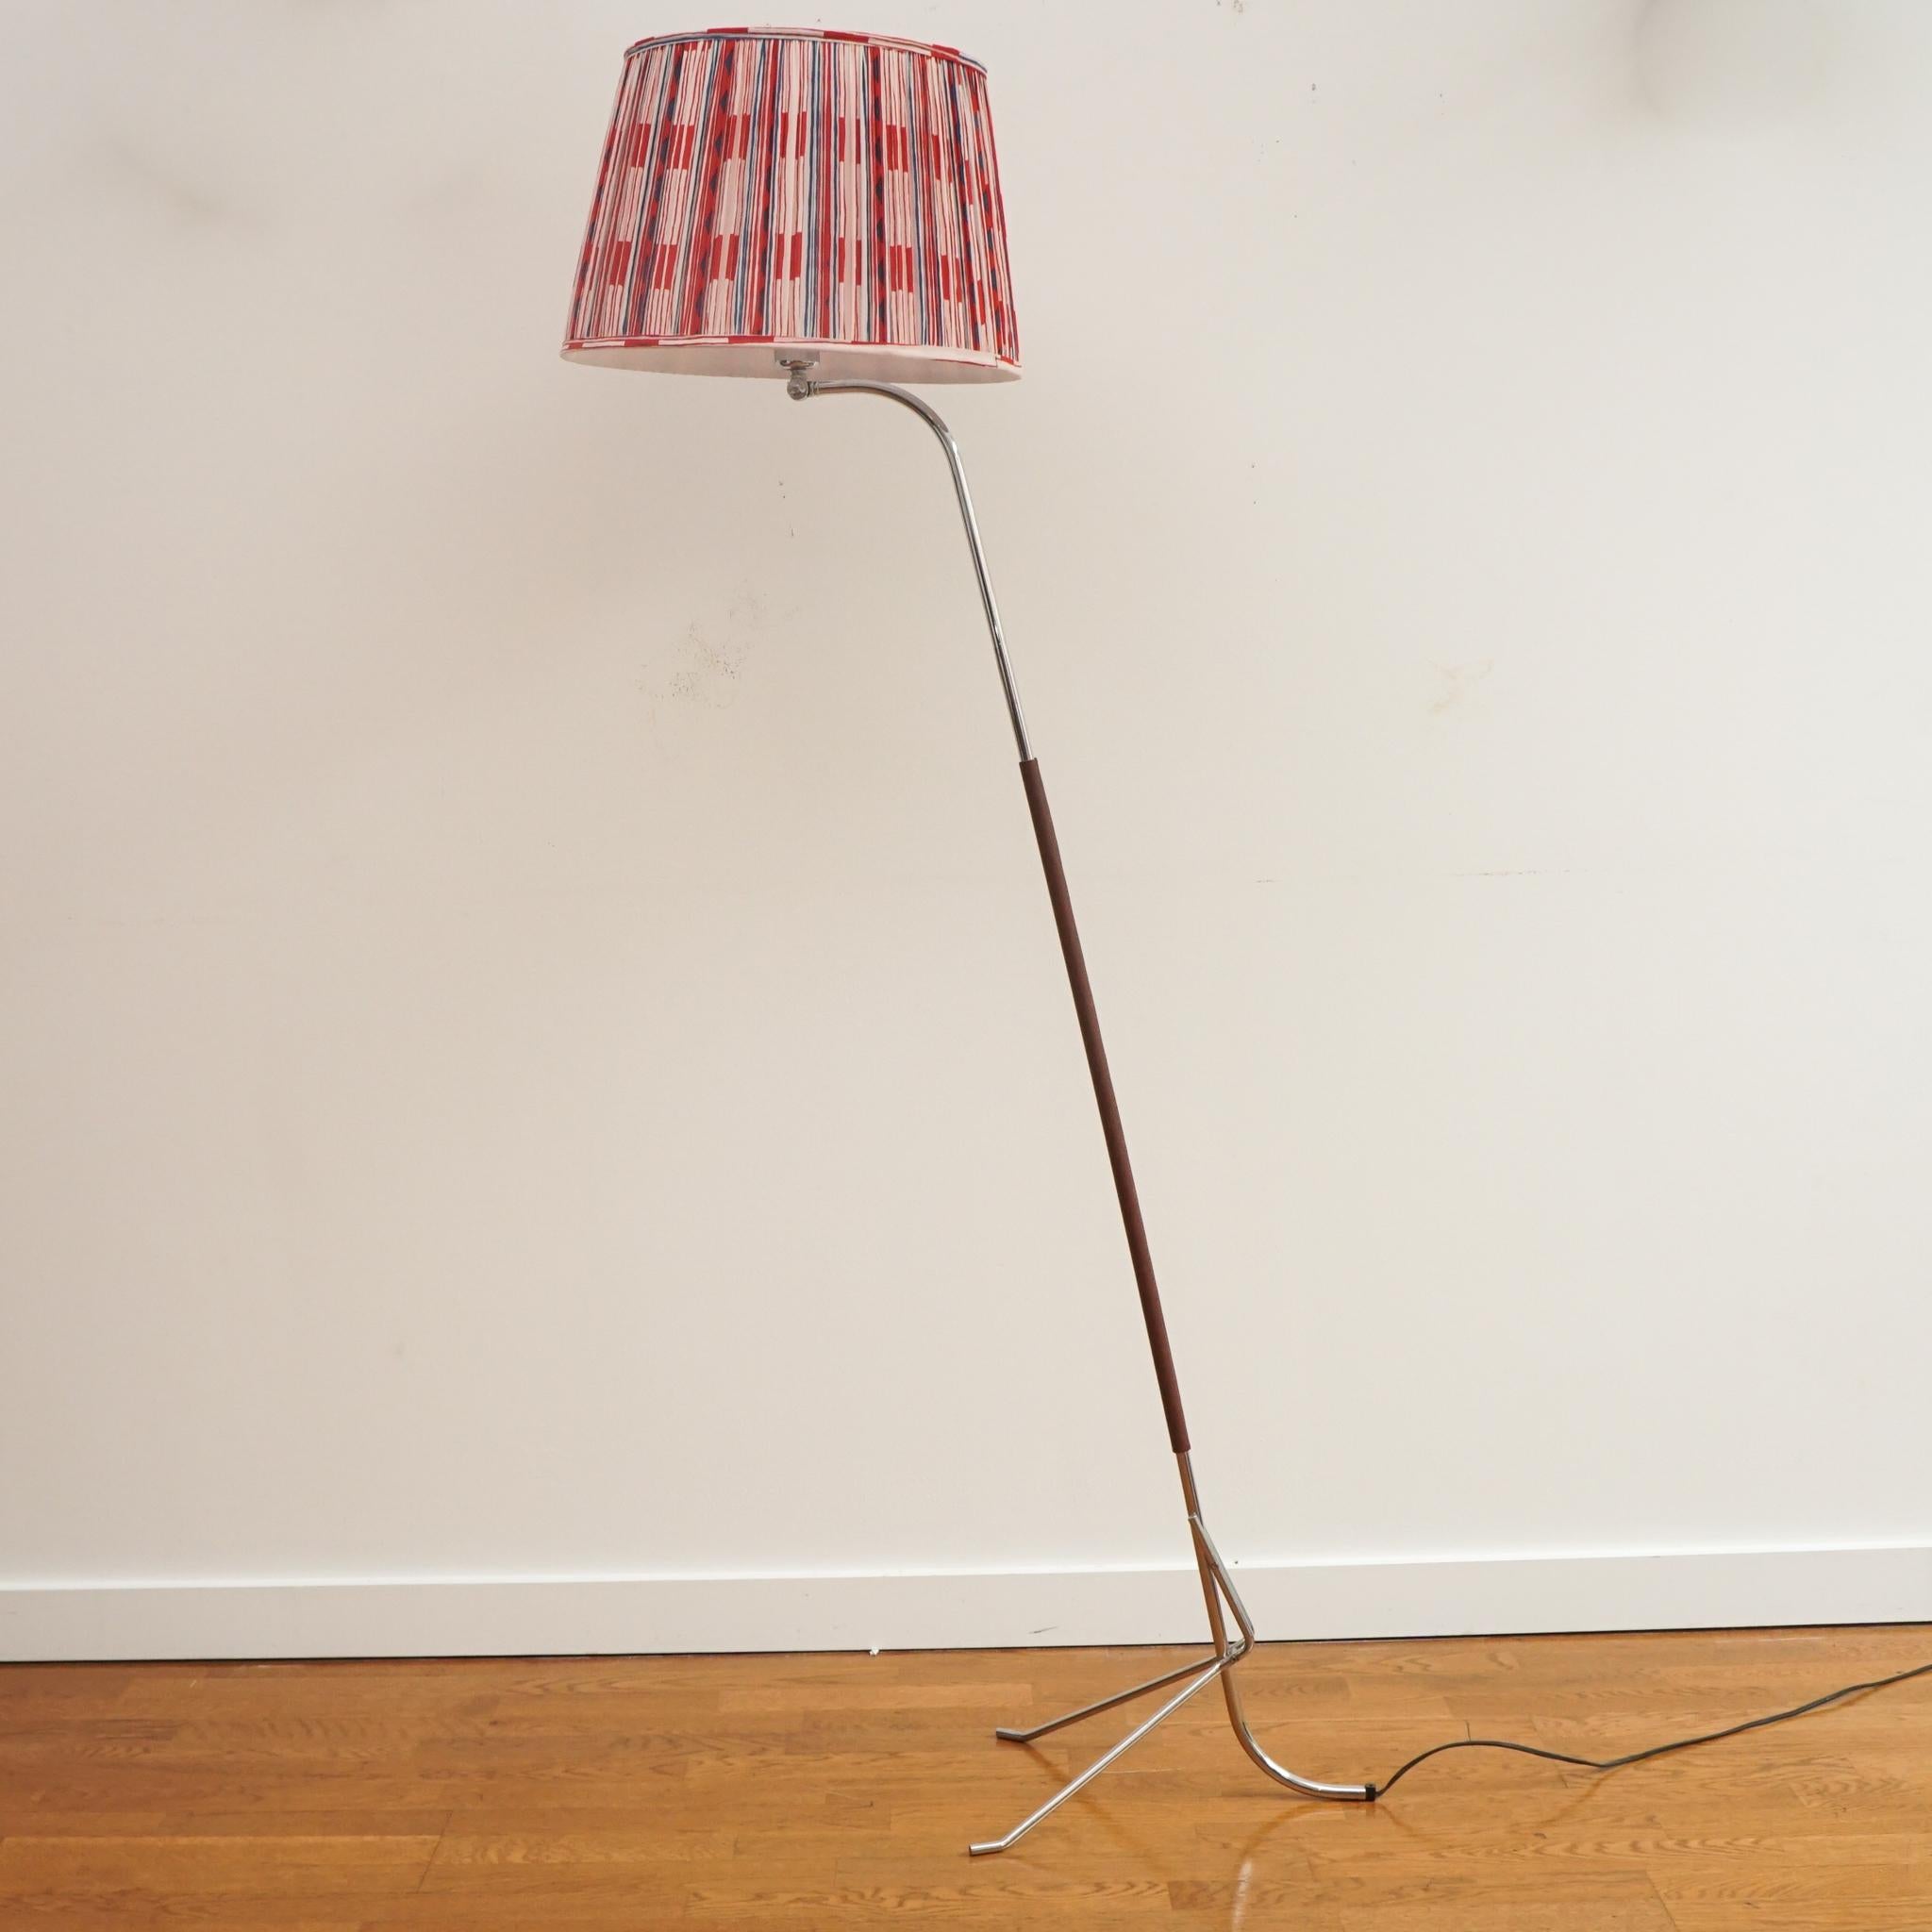 Vintage Chrome and Leather Floor Lamp with Tripod Base 1